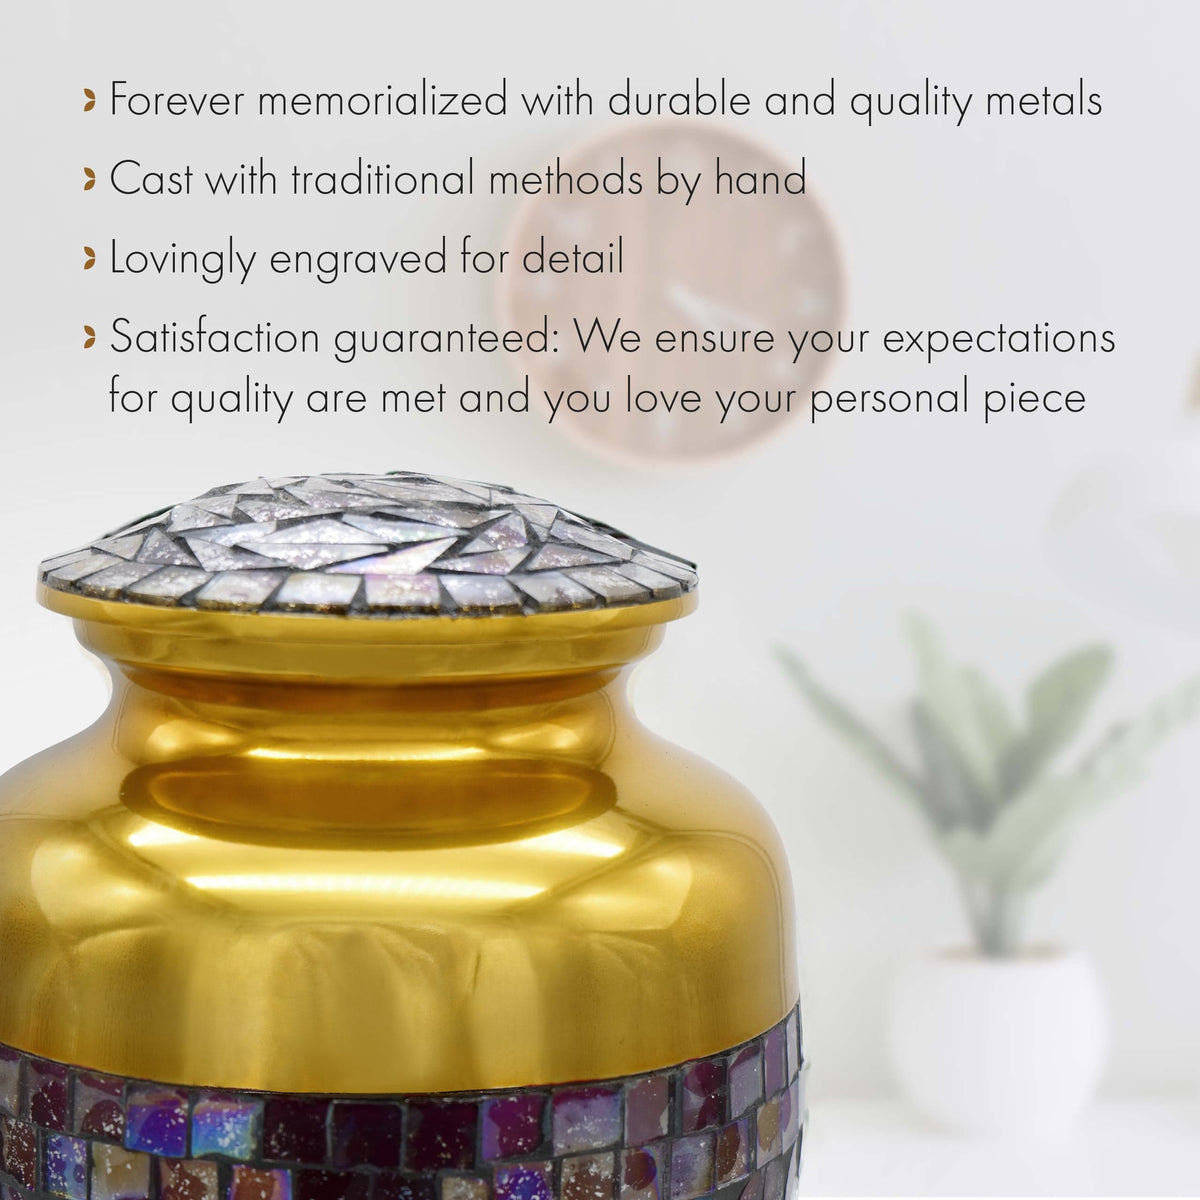 Commemorative Cremation Urns large Gold Cracked Glass Mosaic Cremation Urn